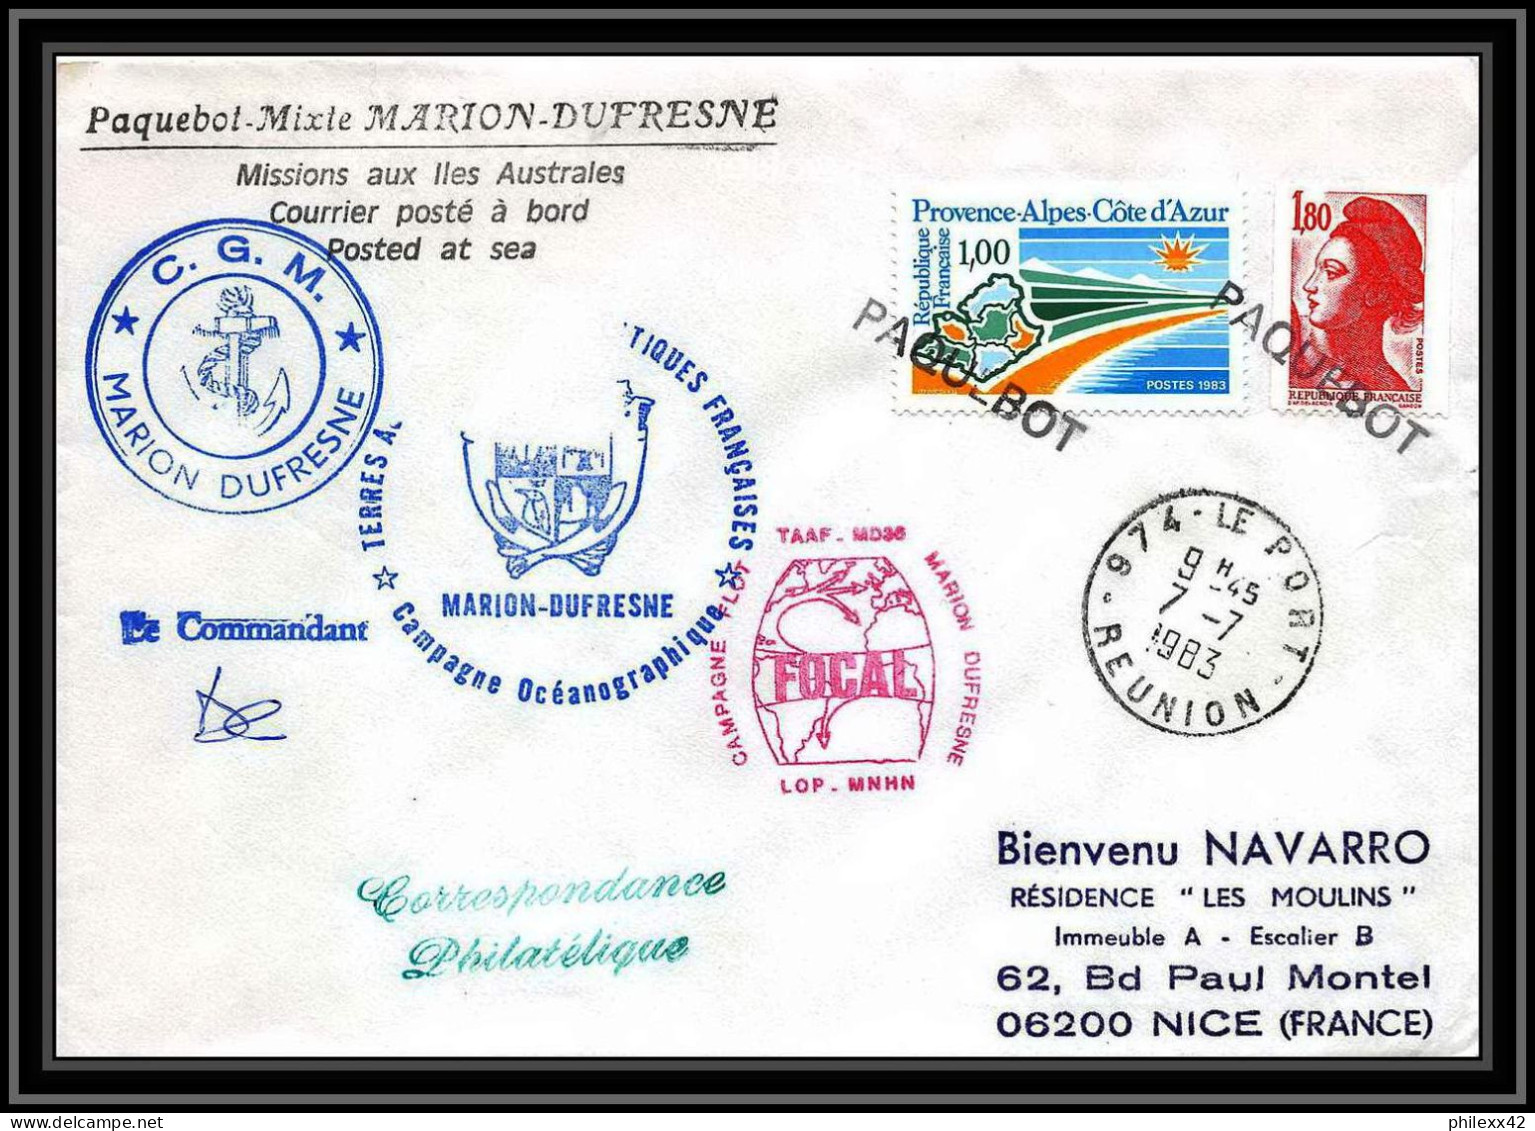 1381 Marion Dufresne Signé Signed 22/7/1983 Paquebot TAAF Antarctic Terres Australes Lettre (cover) - Antarctic Expeditions